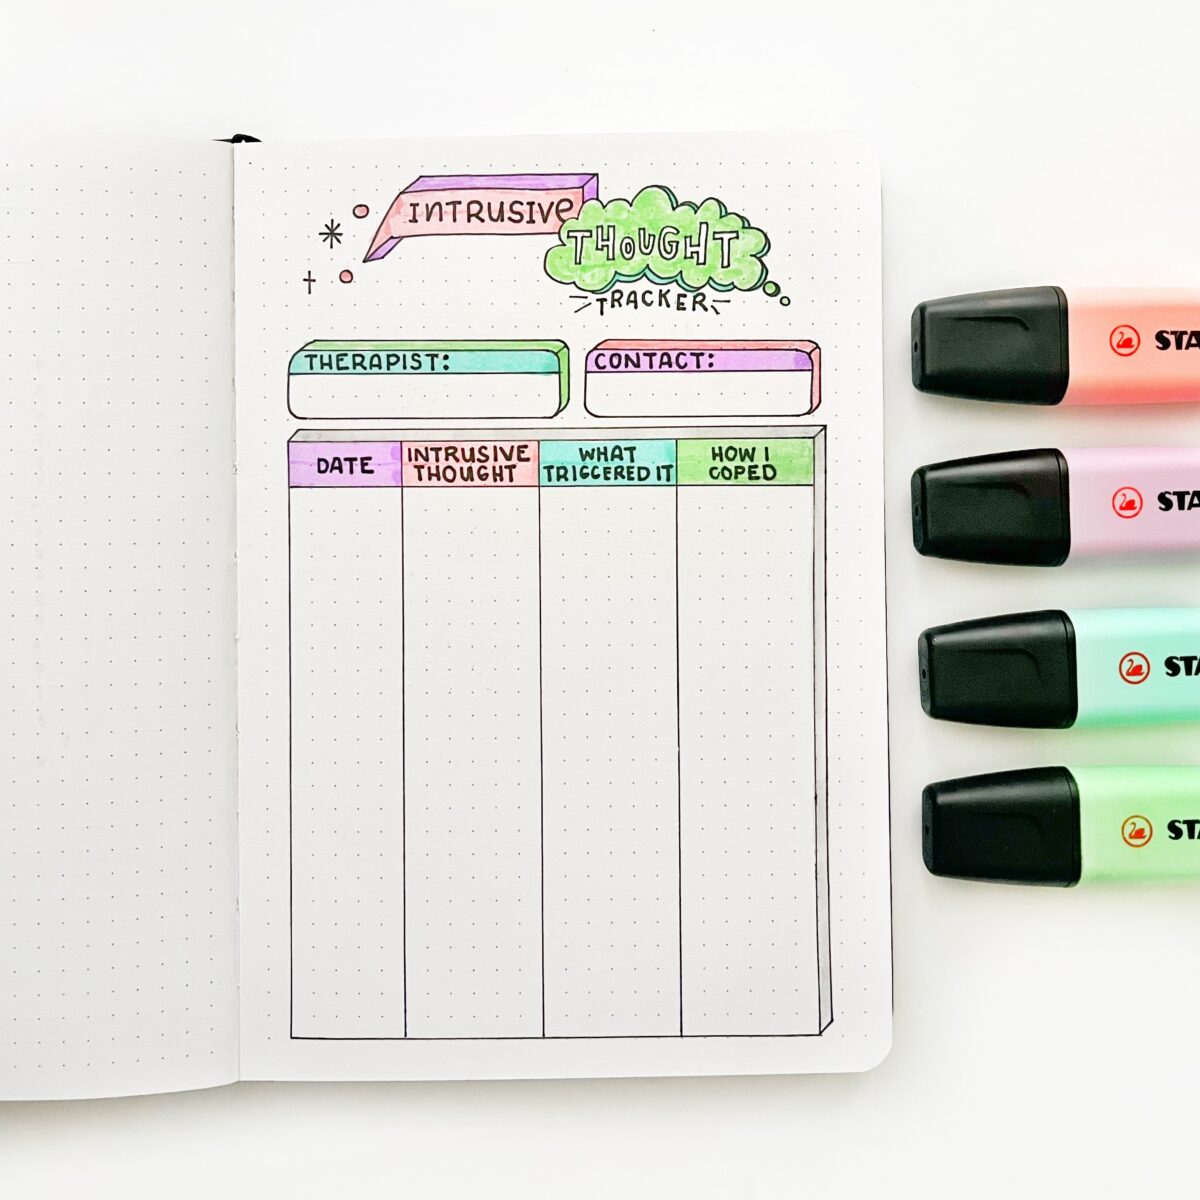 A bullet journal intrusive thought tracker layout on the page of an open journal.